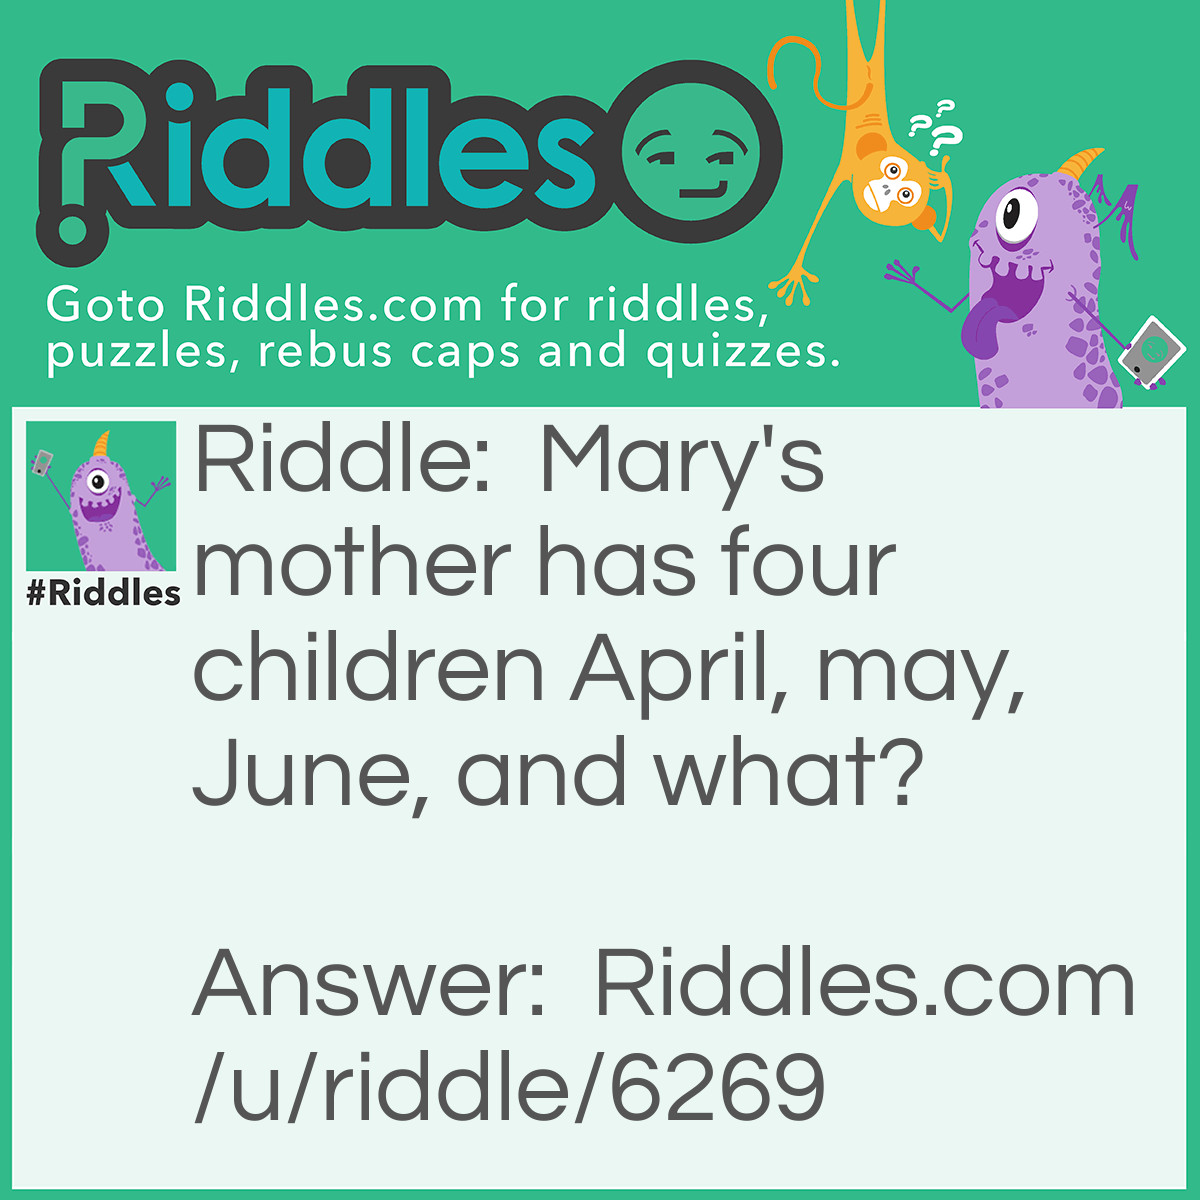 Riddle: Mary's mother has four children April, may, June, and what? Answer: Mary.